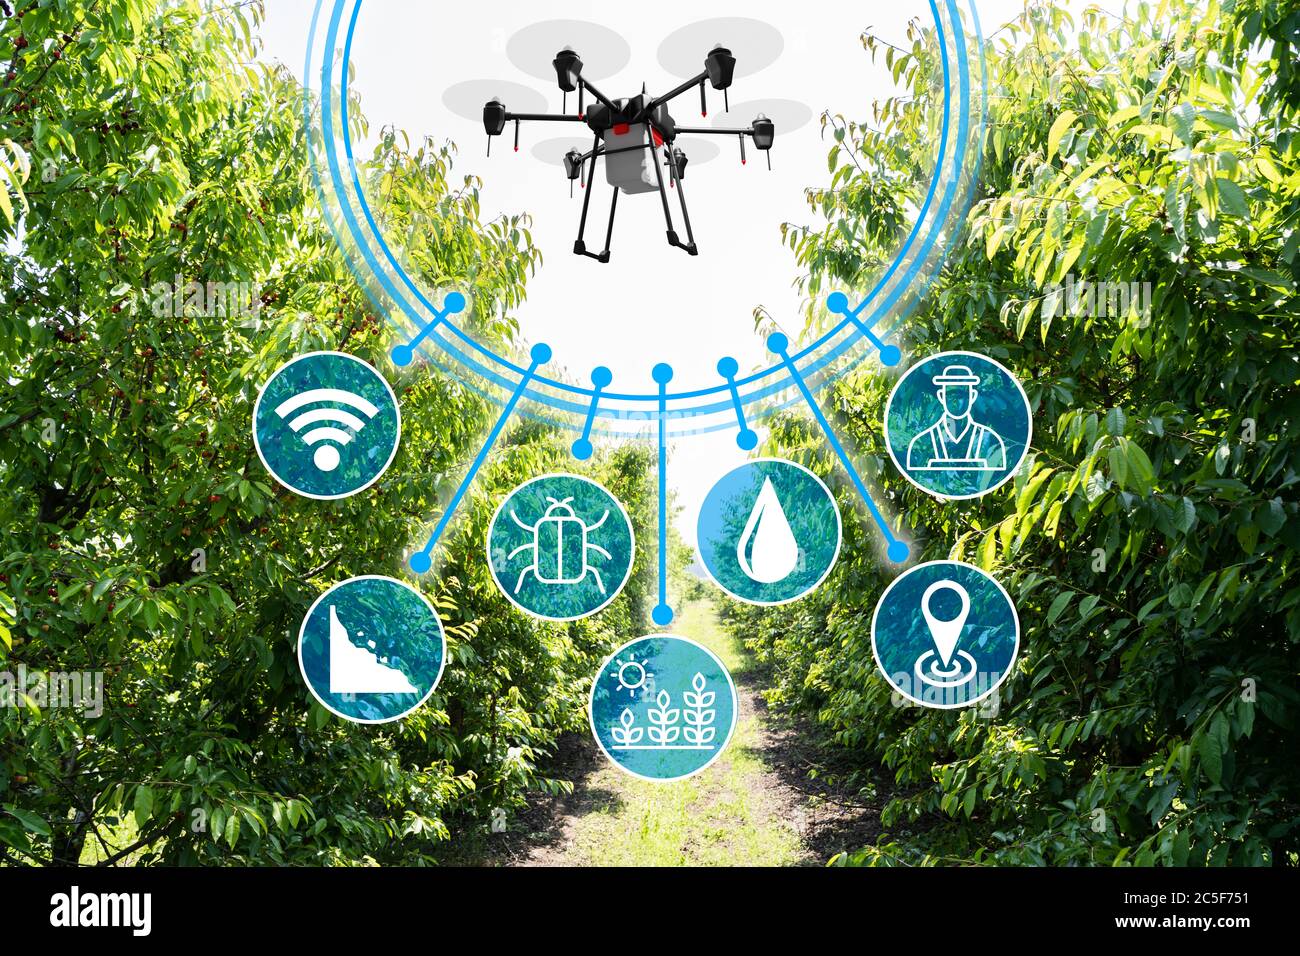 Agriculture Industry Farming Technology At Plant Field Or Farm Stock Photo